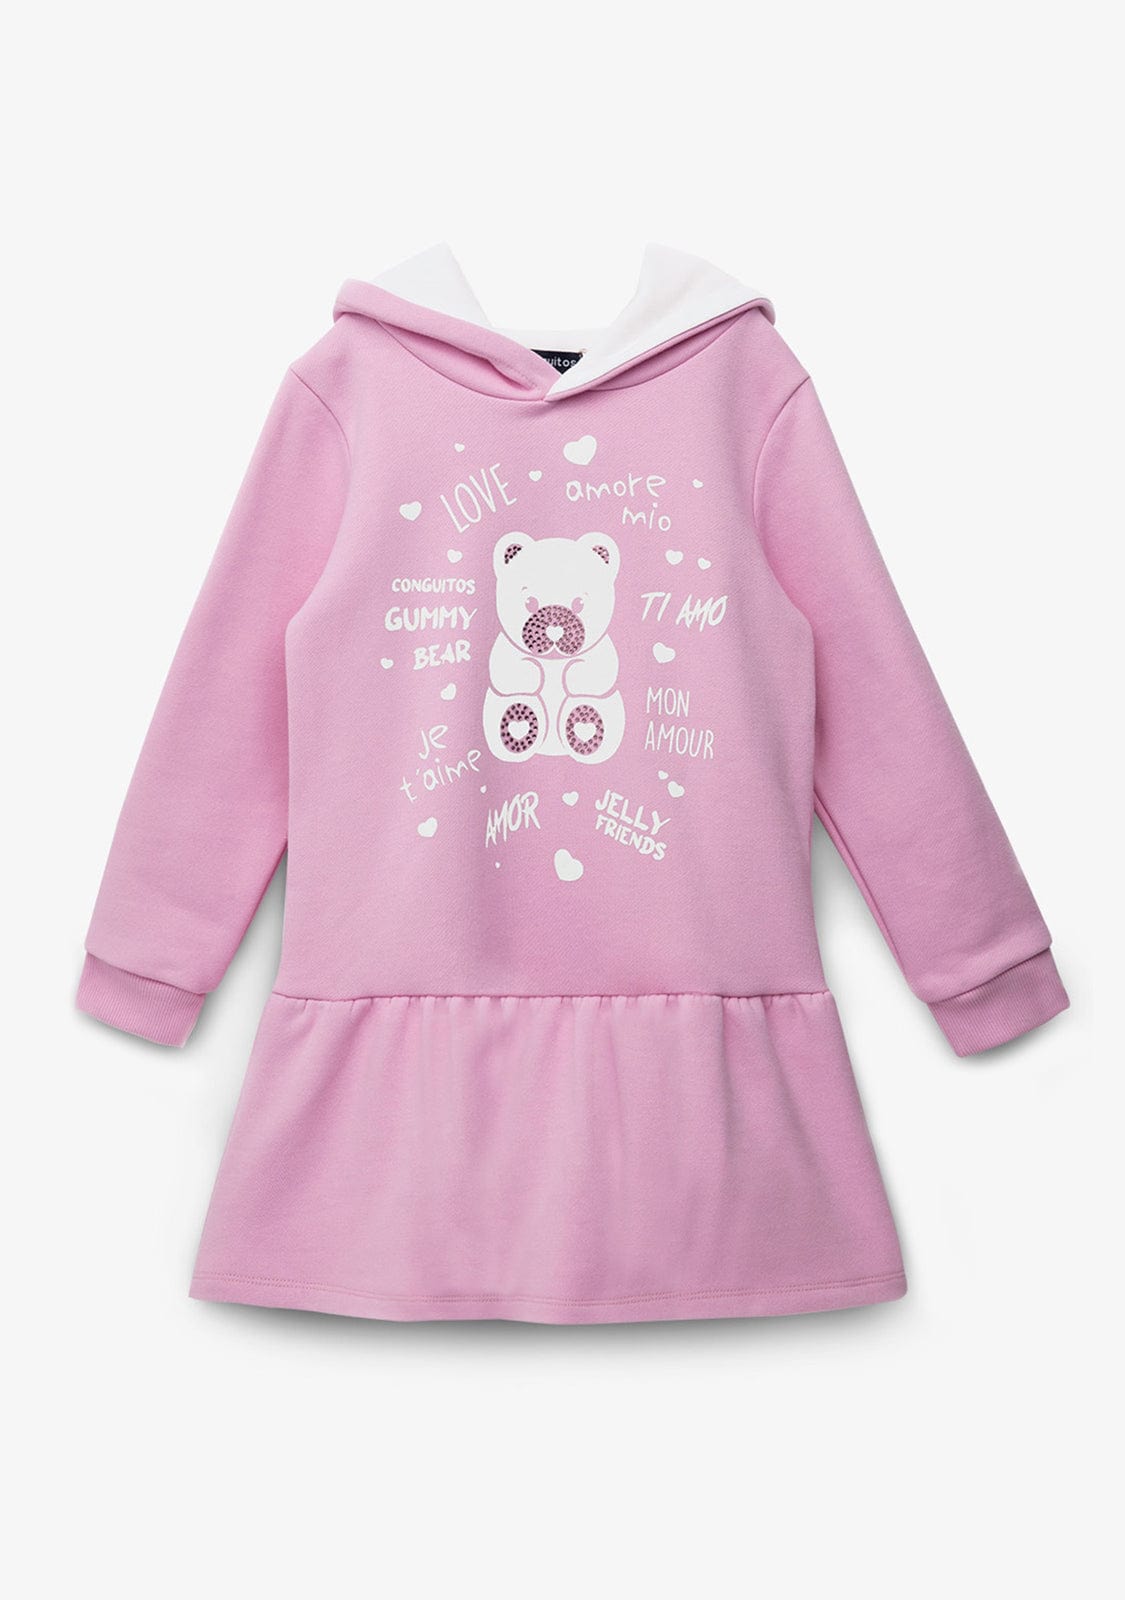 CONGUITOS TEXTIL Clothing Girl's Pink Bear Rhinestones Hooded Dress